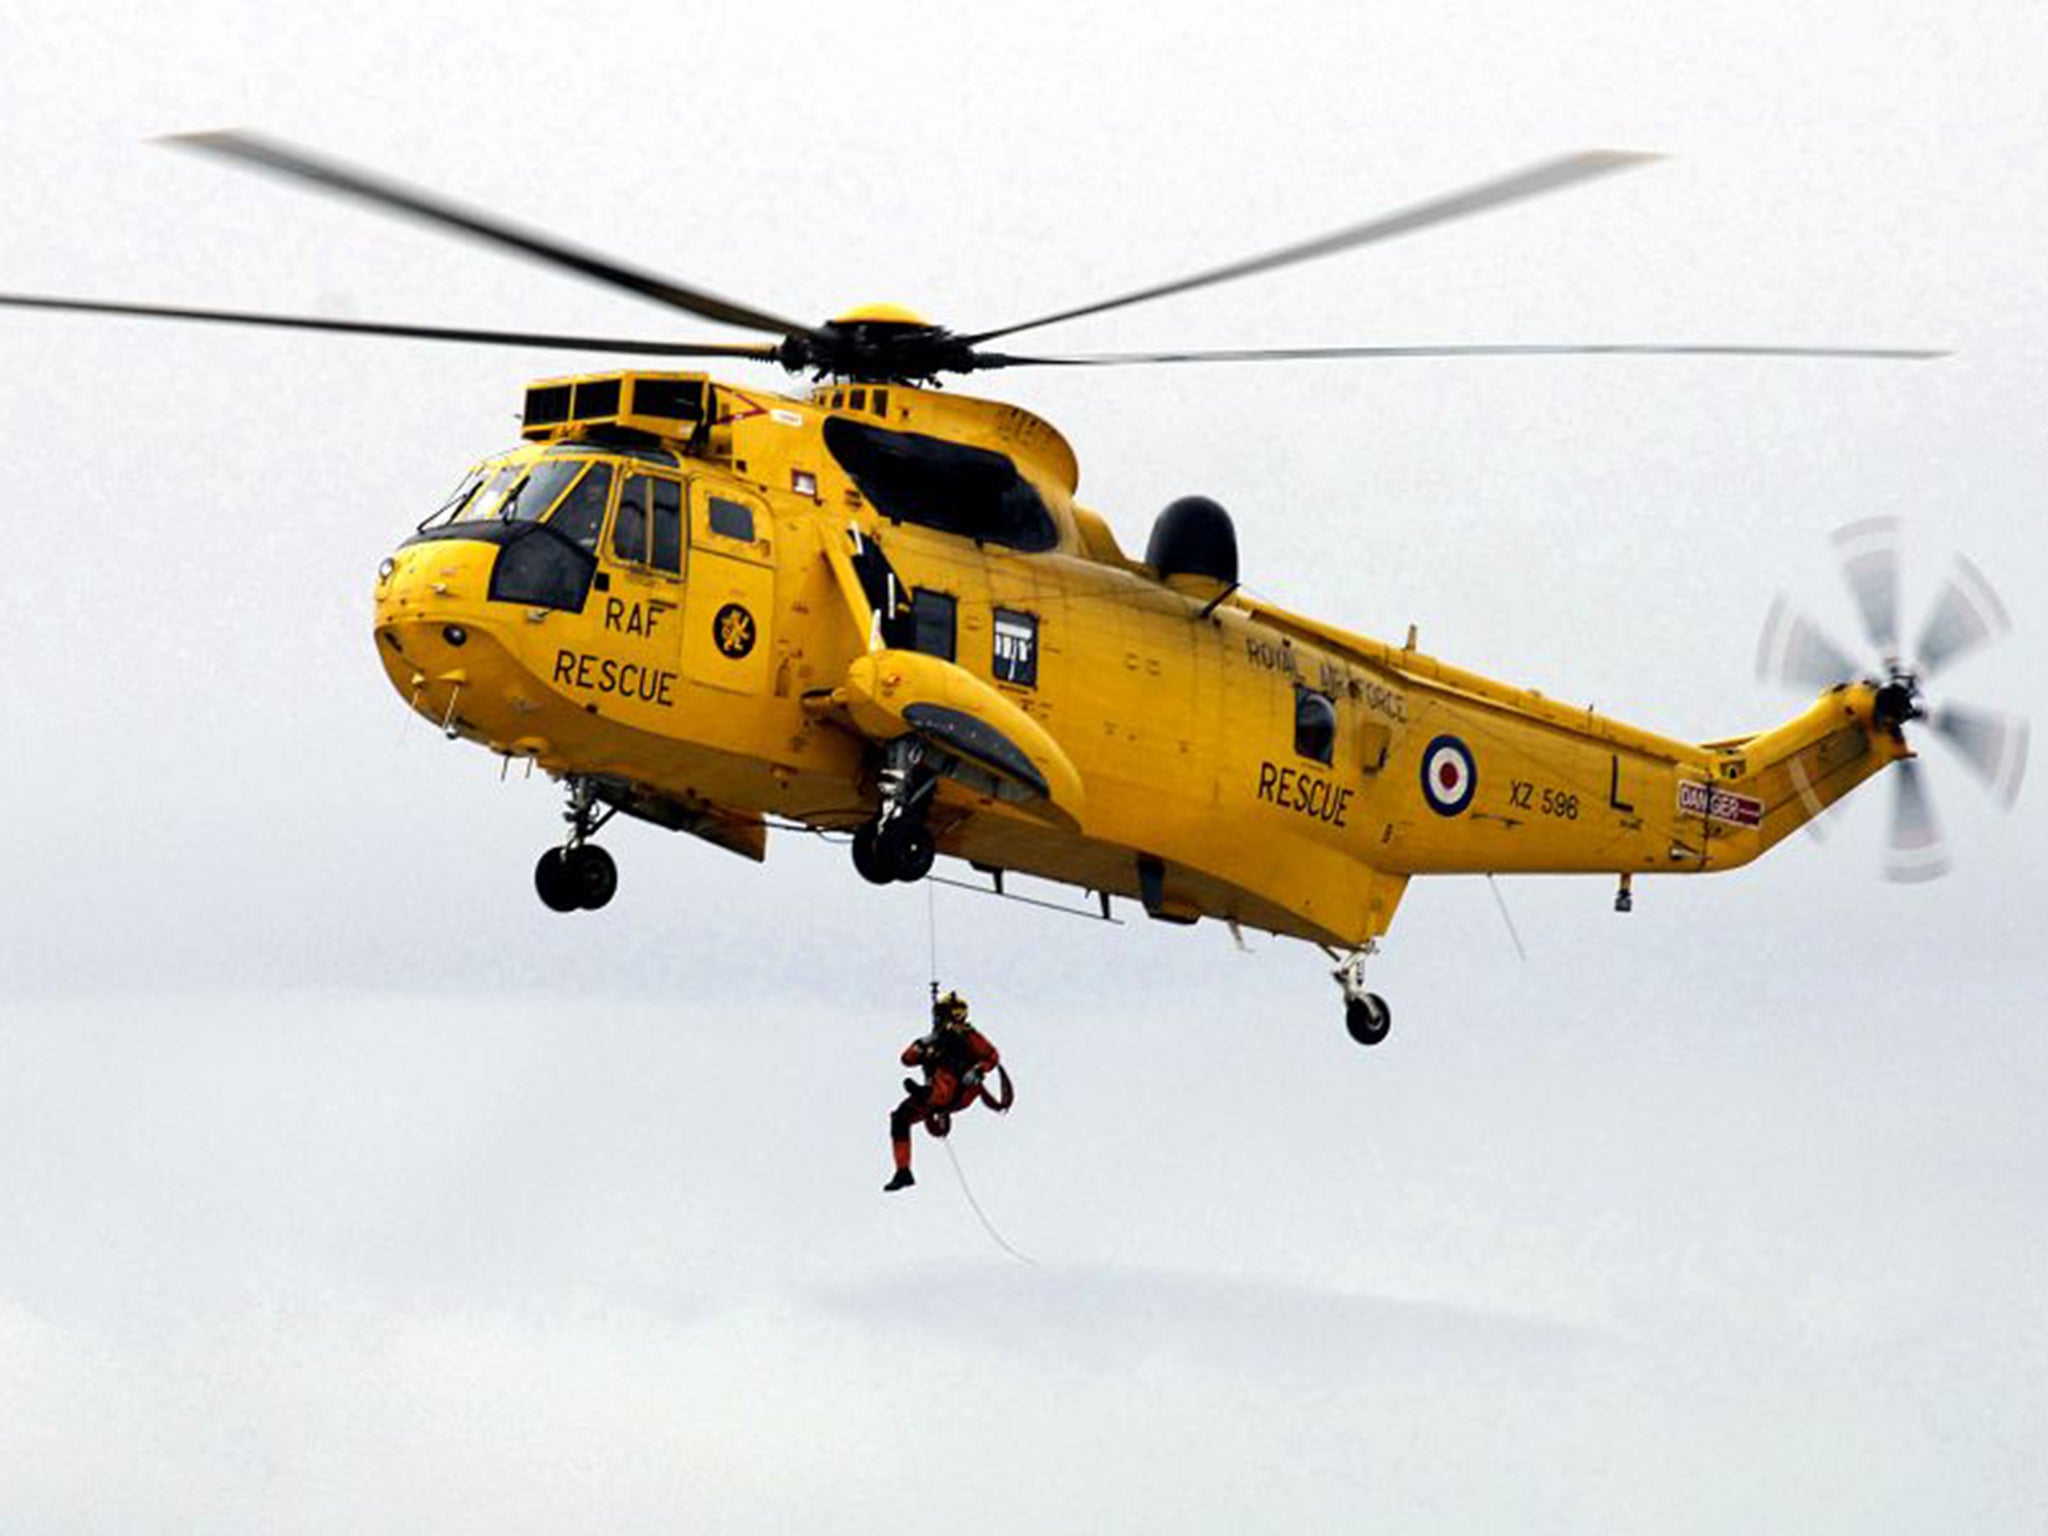 21 RAF Sea King rescue helicopters are listed as being on active service